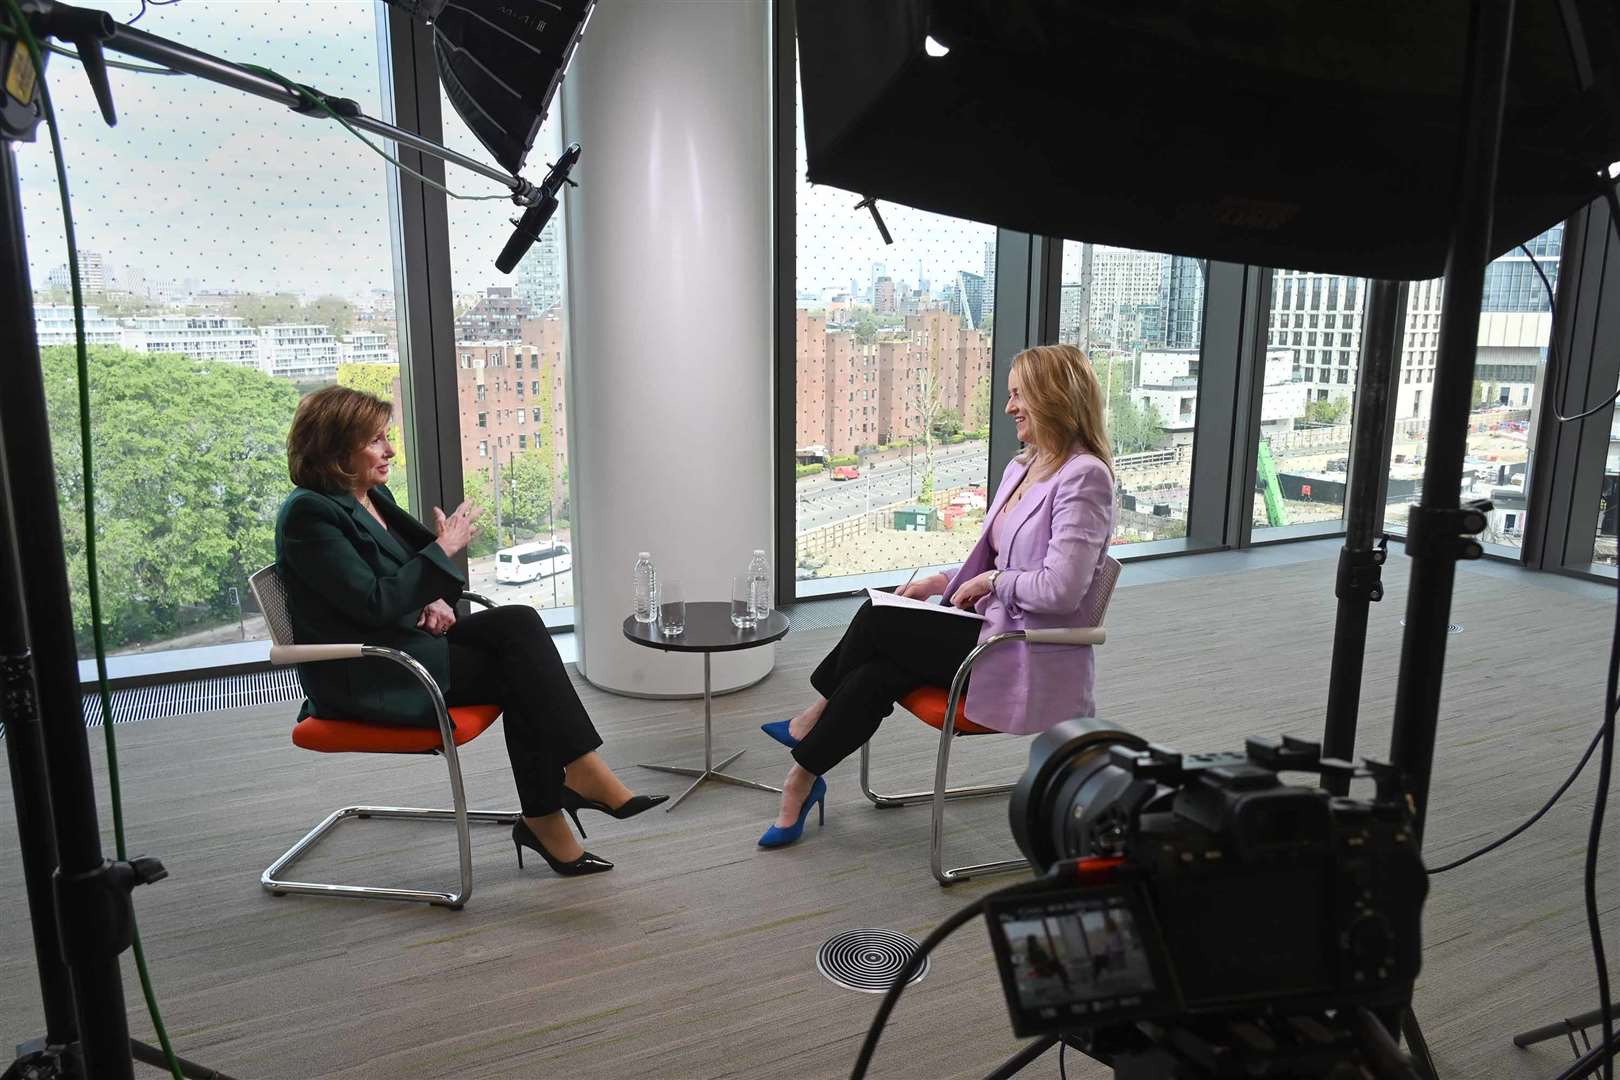 Nancy Pelosi (left) was interviewed on the BBC’s Sunday with Laura Kuenssberg (Jeff Overs/BBC/PA)